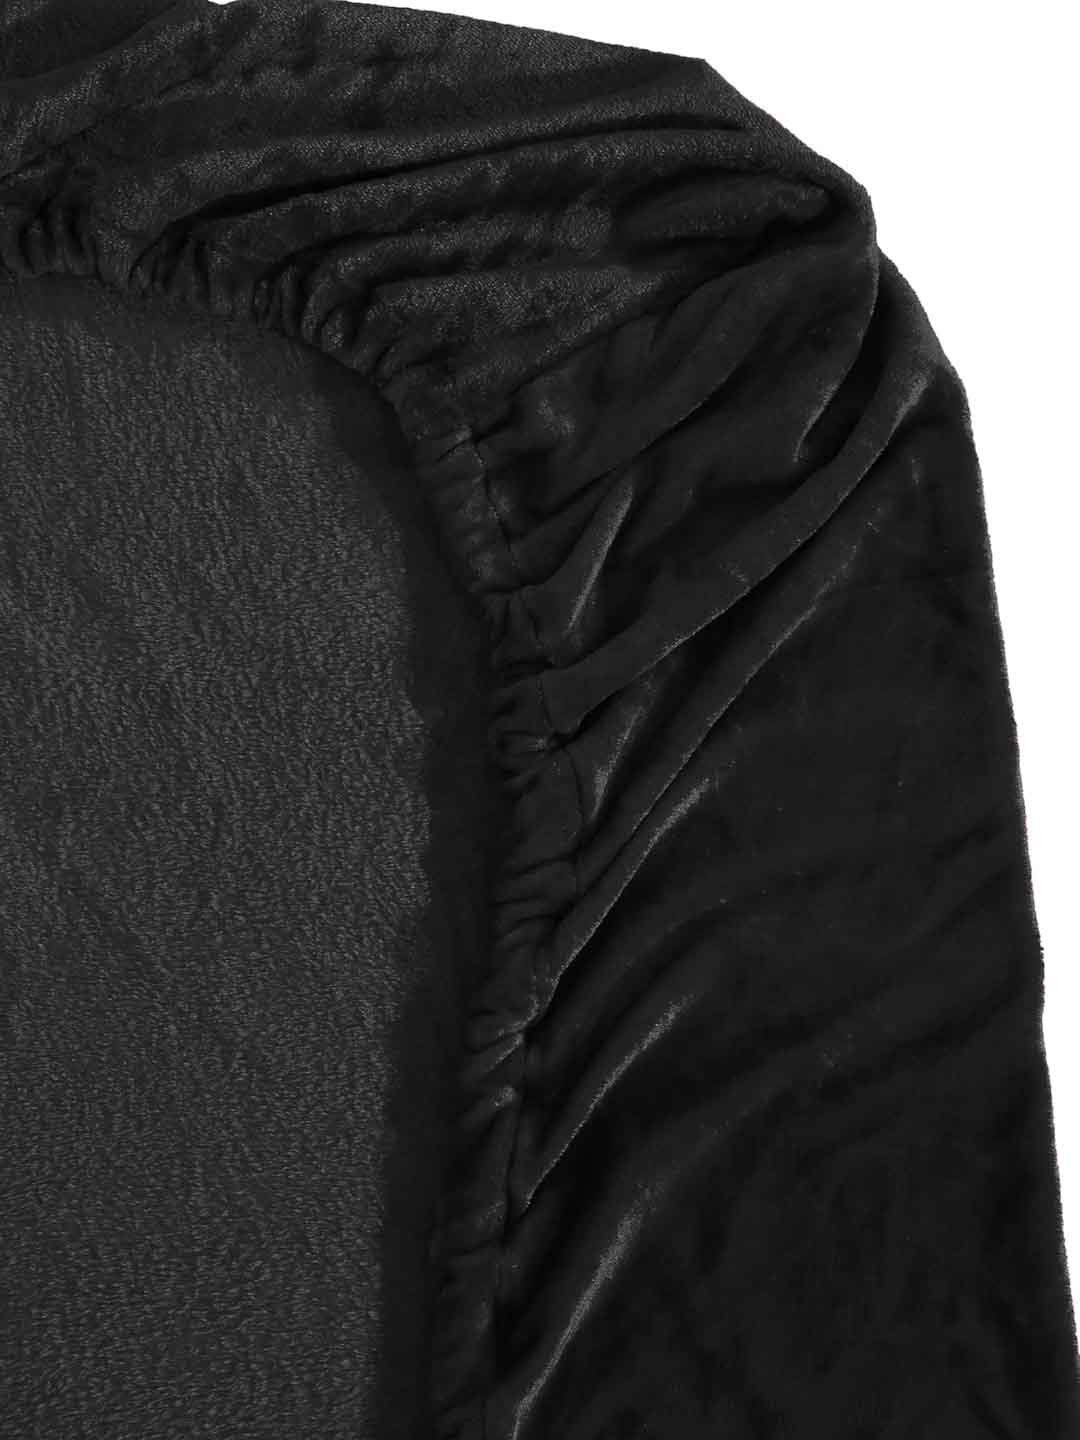 Klotthe Black Solid Woolen Fitted Single Bed Sheet with Pillow Cover